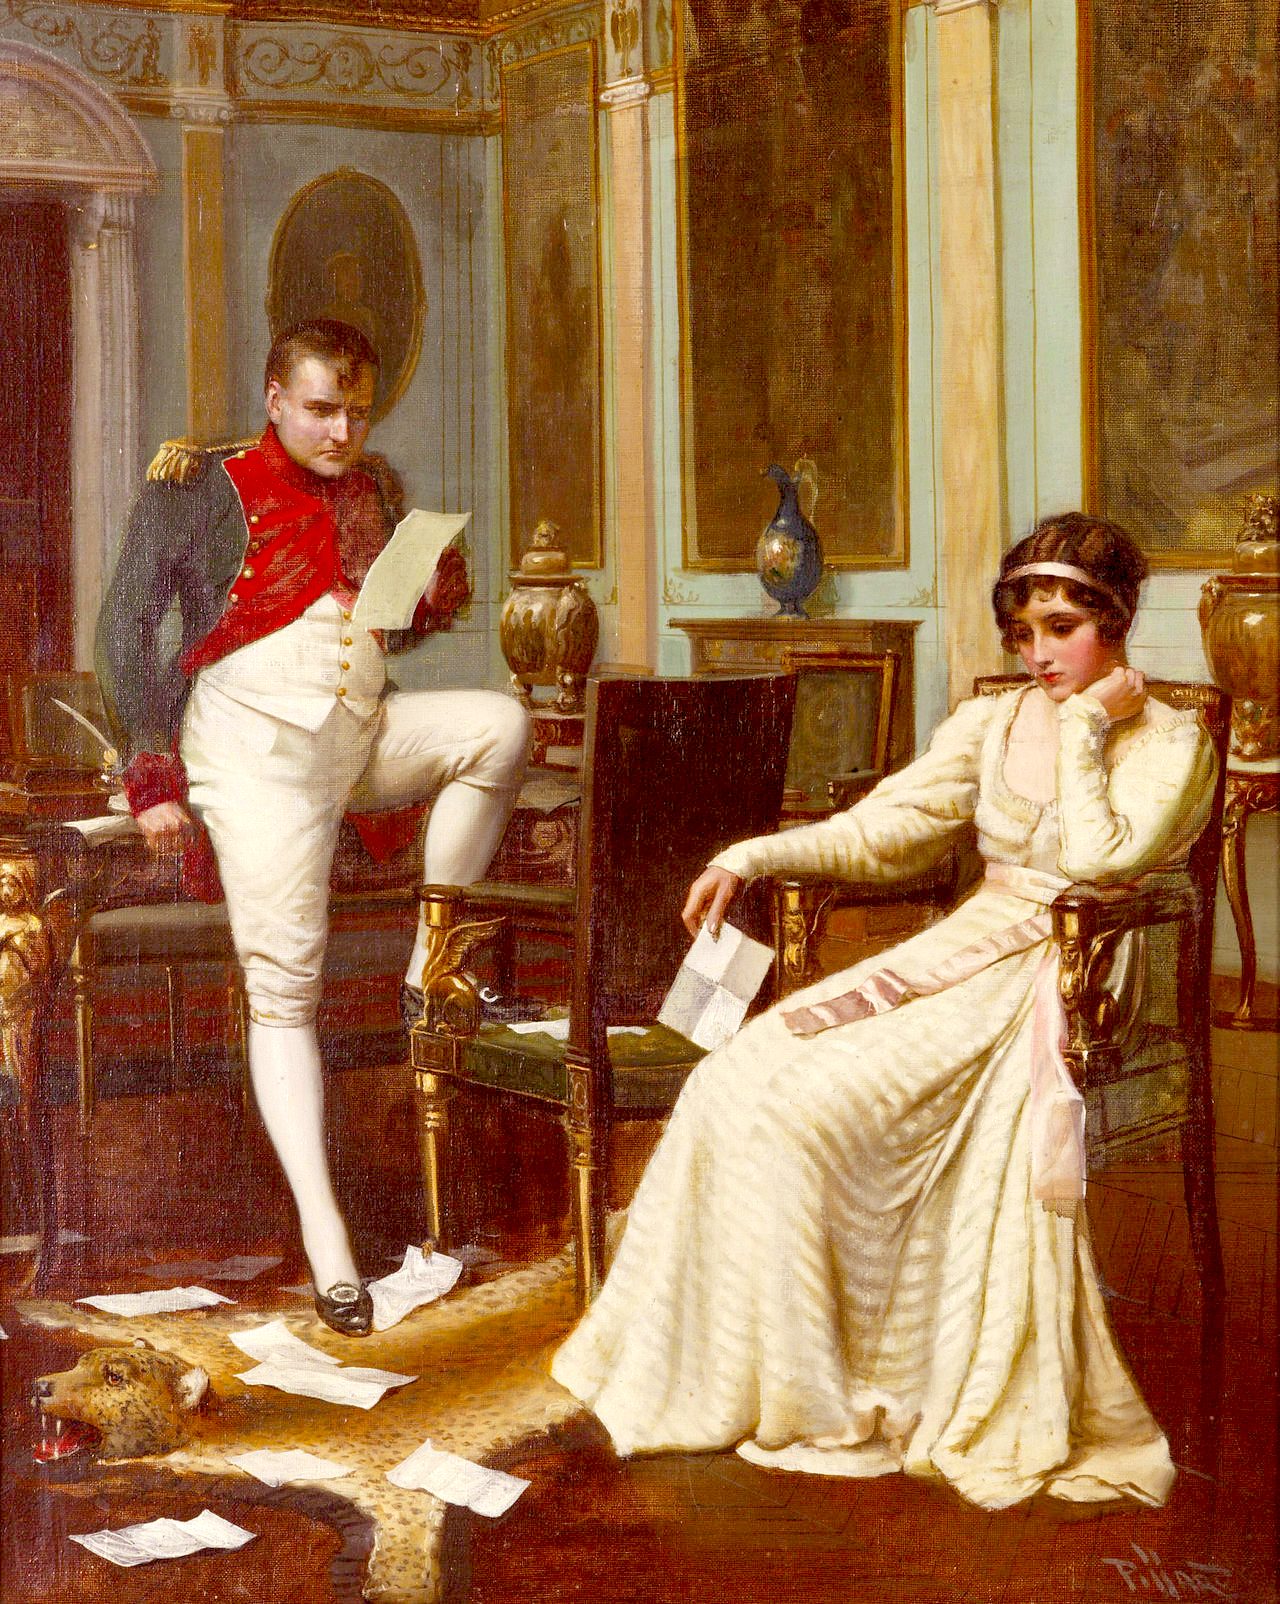 The painting shows Napoleon and Josephine sitting in a room with a table and chairs. Napoleon is reading a letter, while Josephine is looking down with a worried expression on her face.